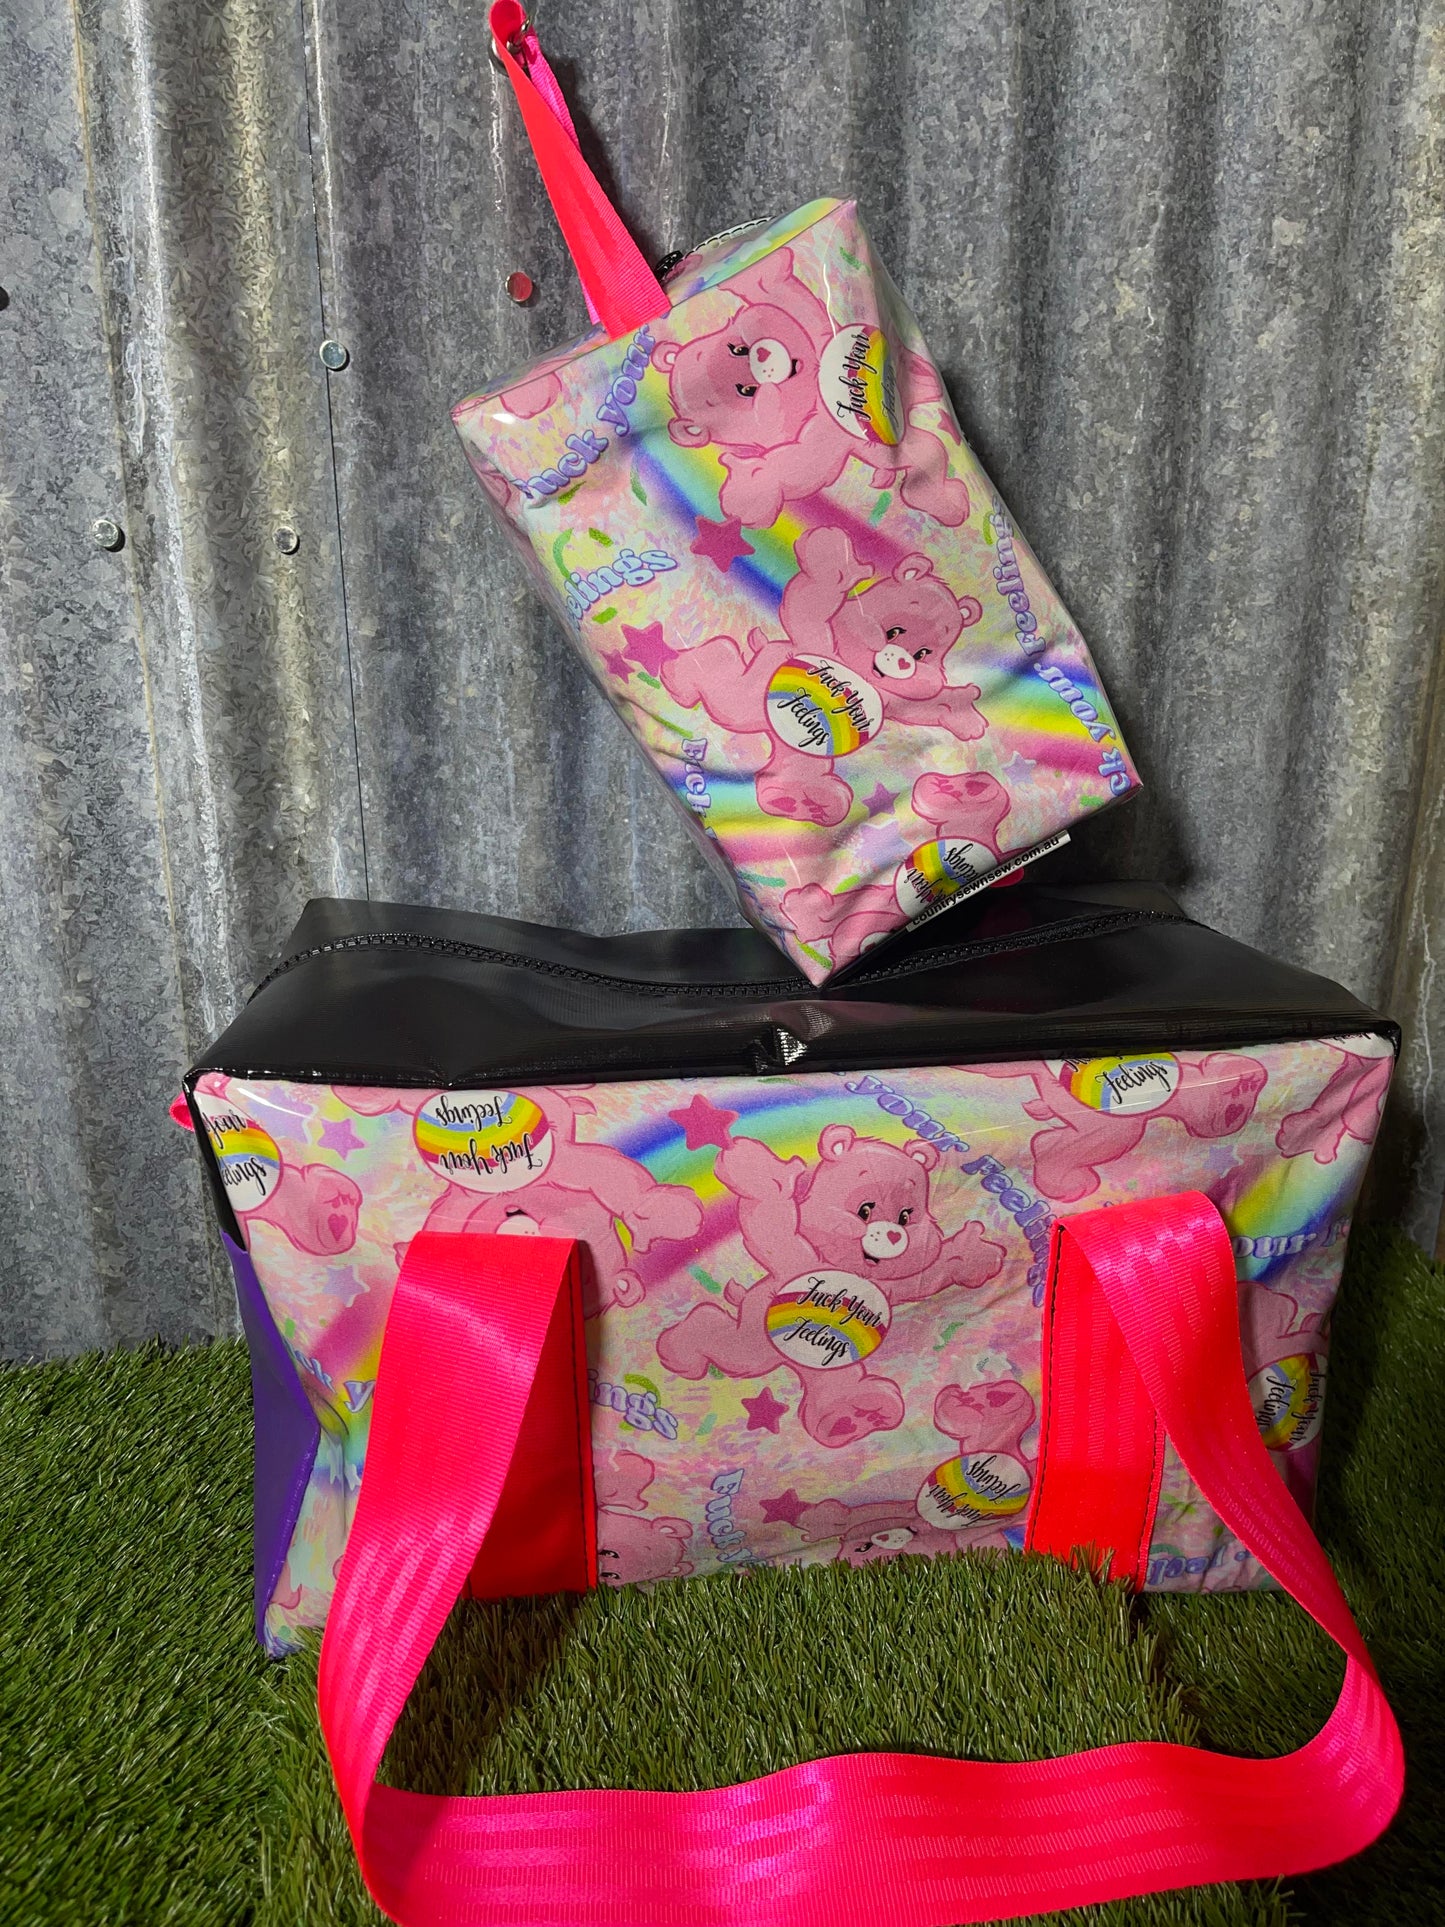 Ready made Overnight bag and toiletry bag set - Care bears (adult version)